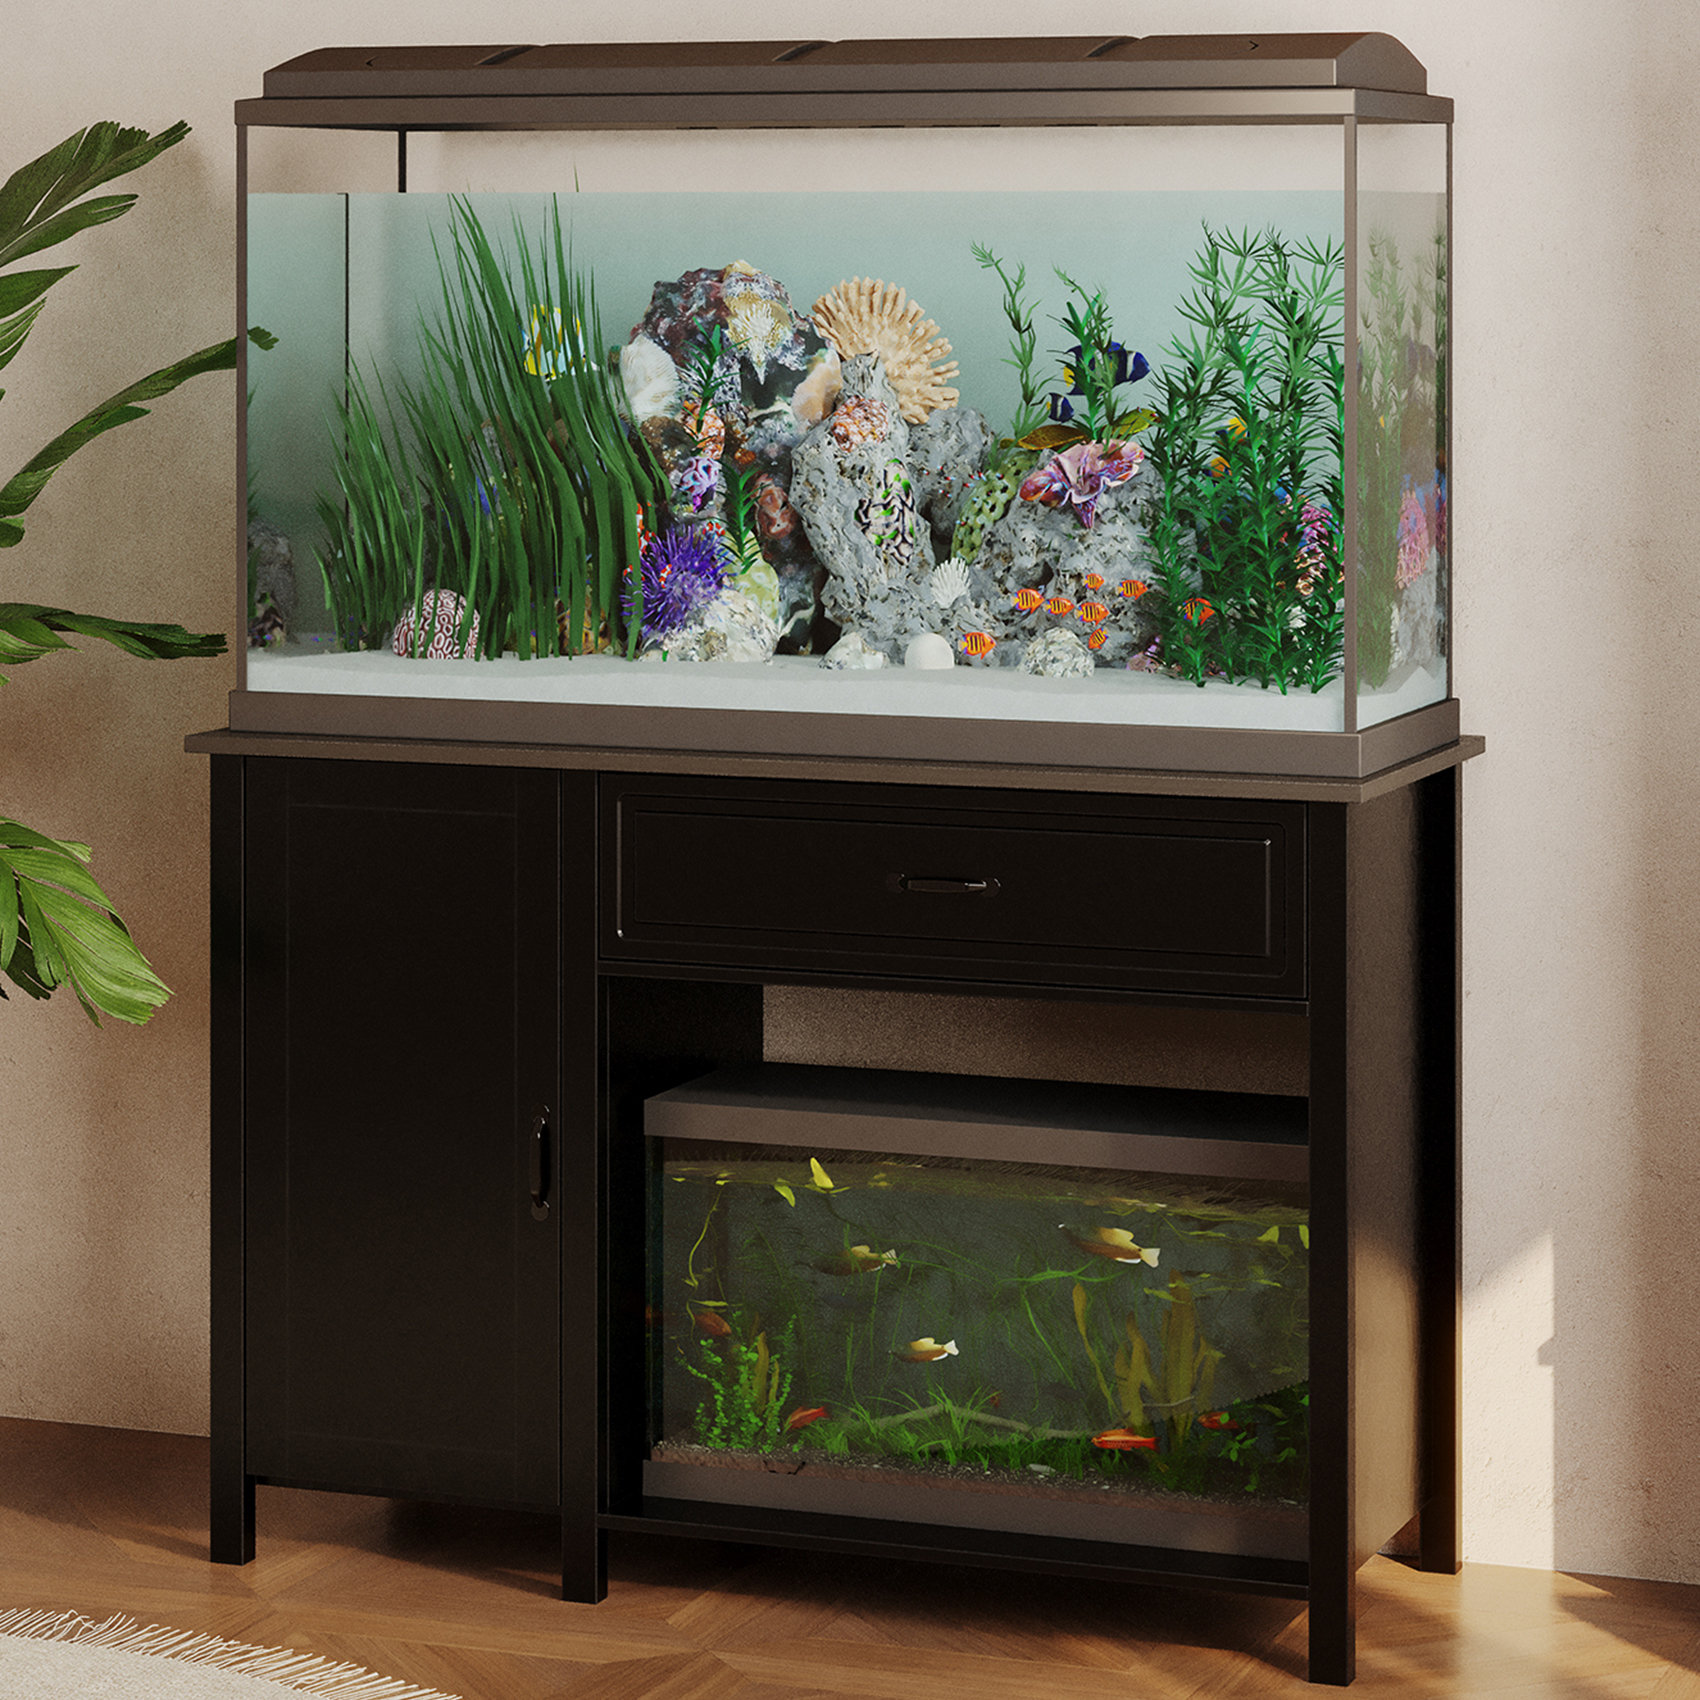 MOWPEX Fish Tank Stand - Heavy Duty Wooden 55-75 Gallon With